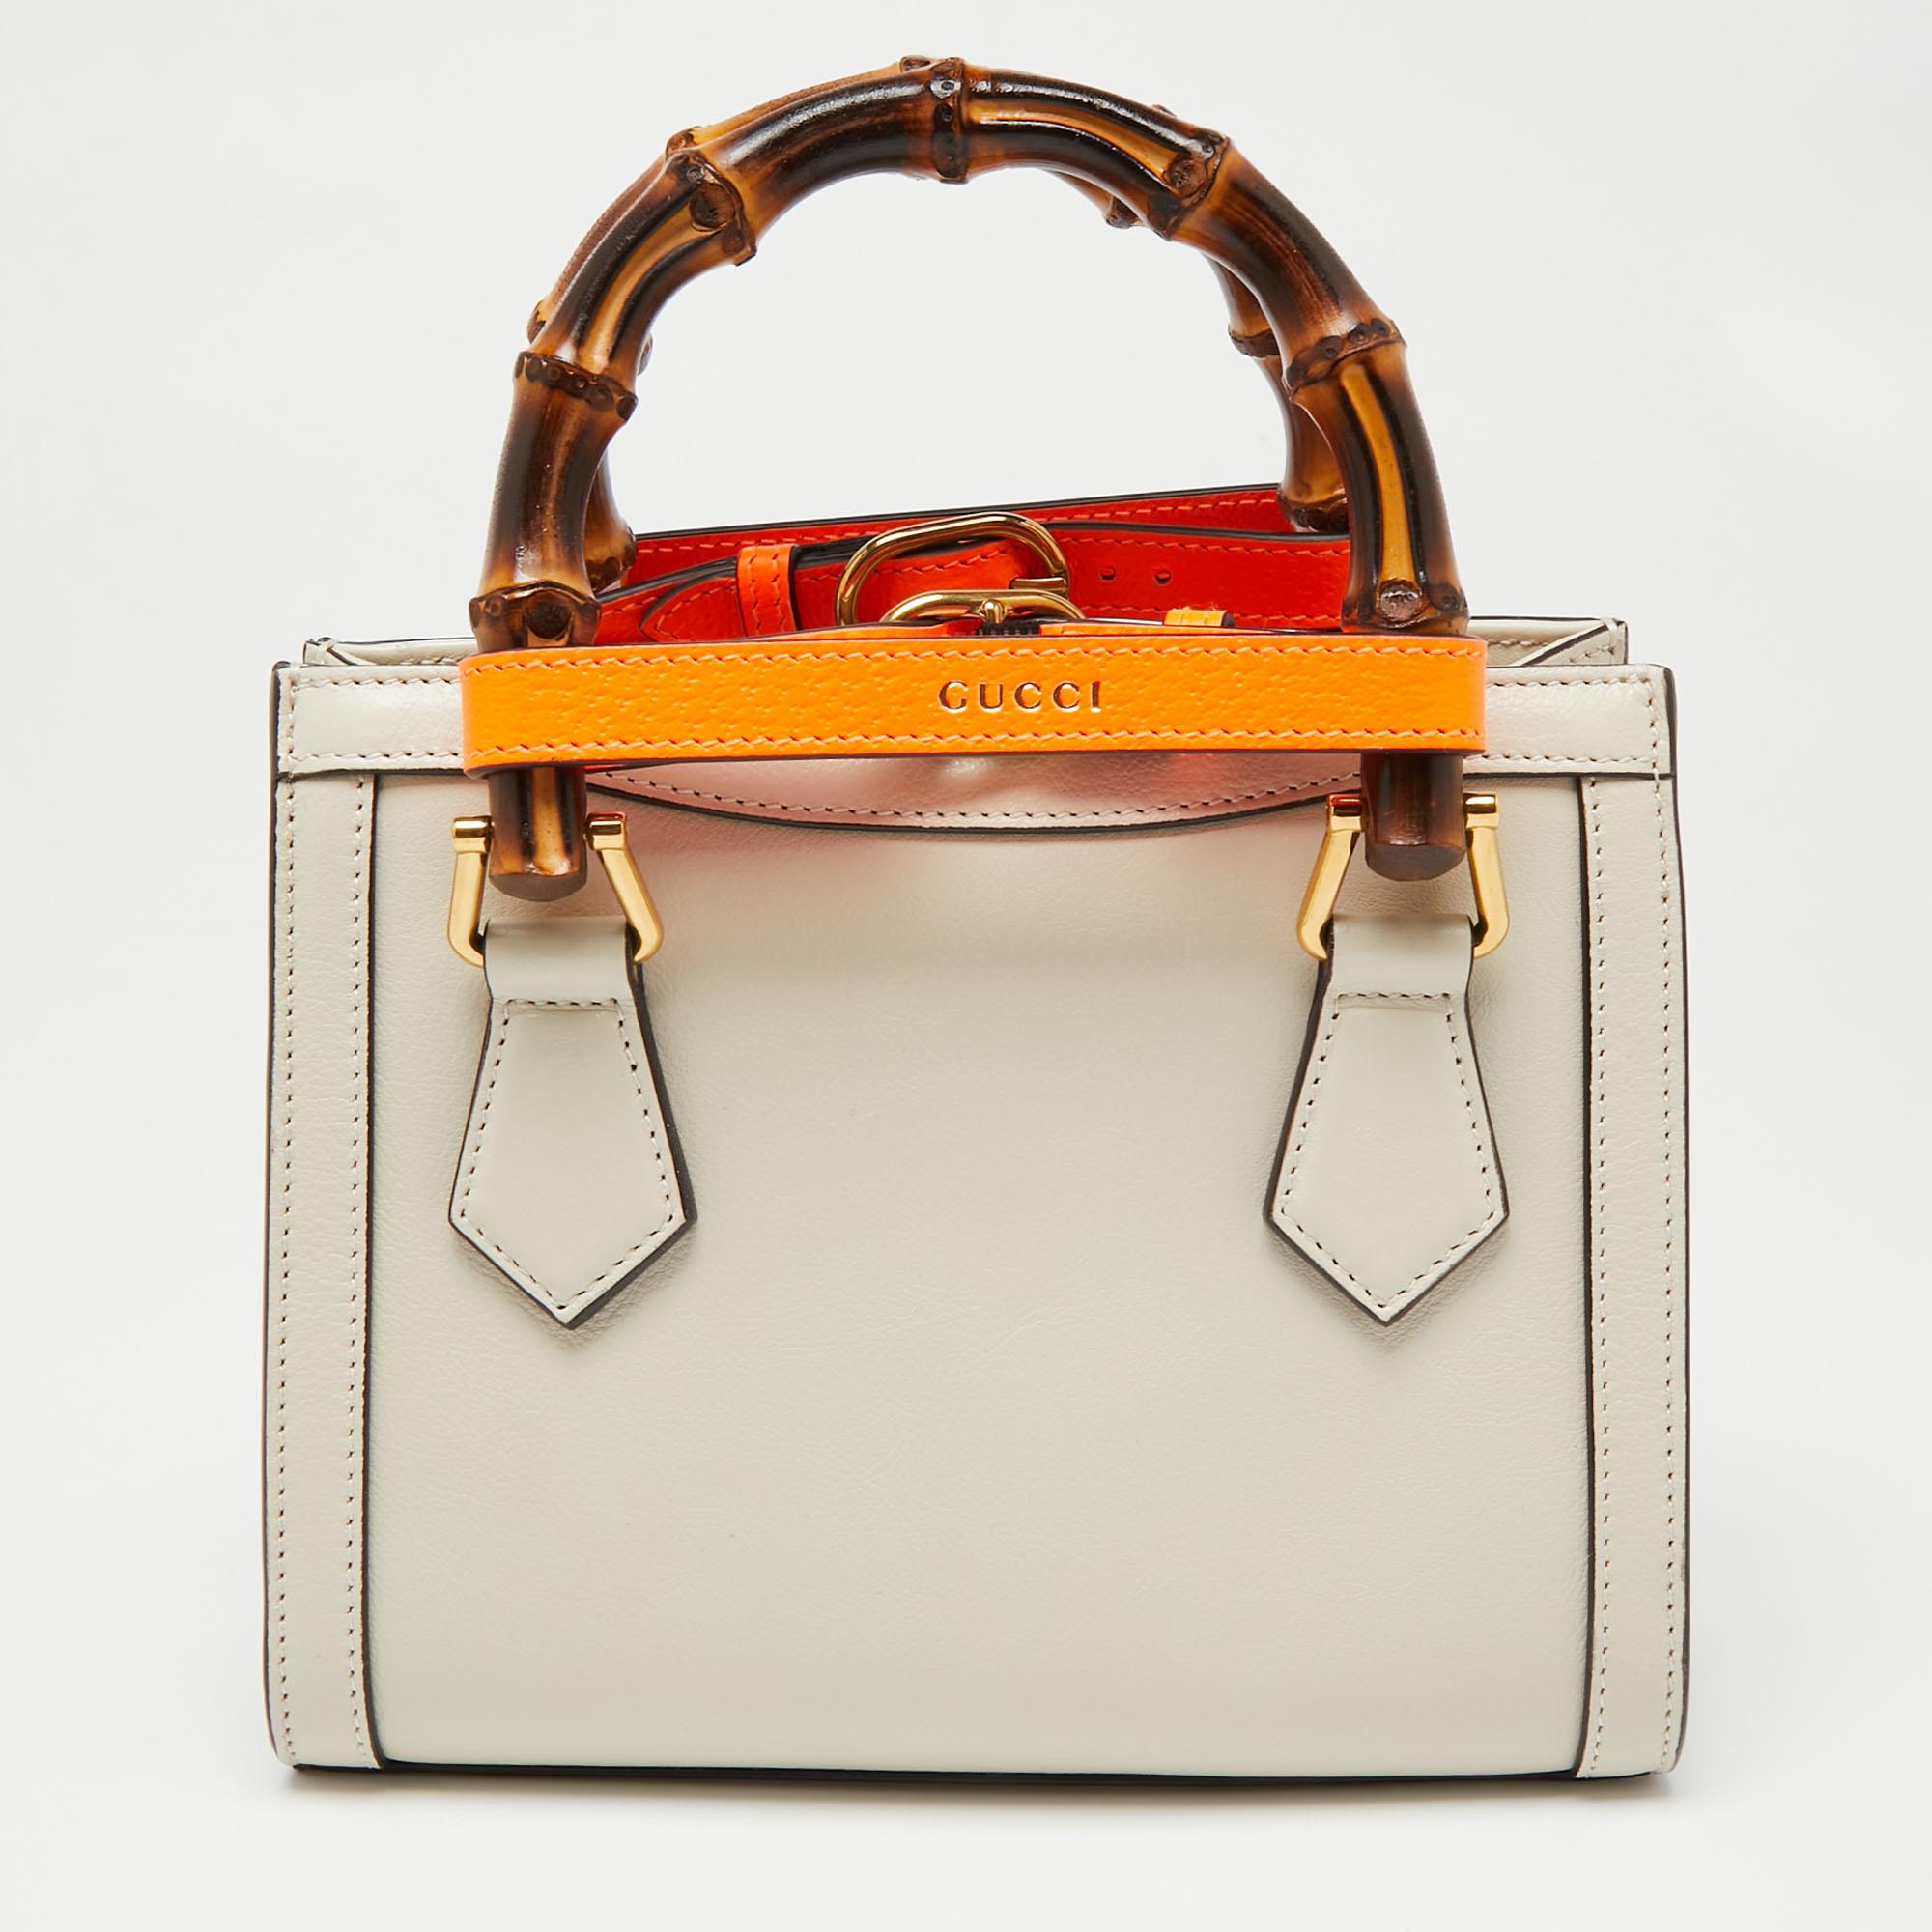 Coming from Gucci is this off-white tote that is the perfect day bag. It is crafted from leather into a structured shape and flaunts gold-tone details, dual handles, a shoulder strap, and a buttoned closure that reveals a capacious interior for your